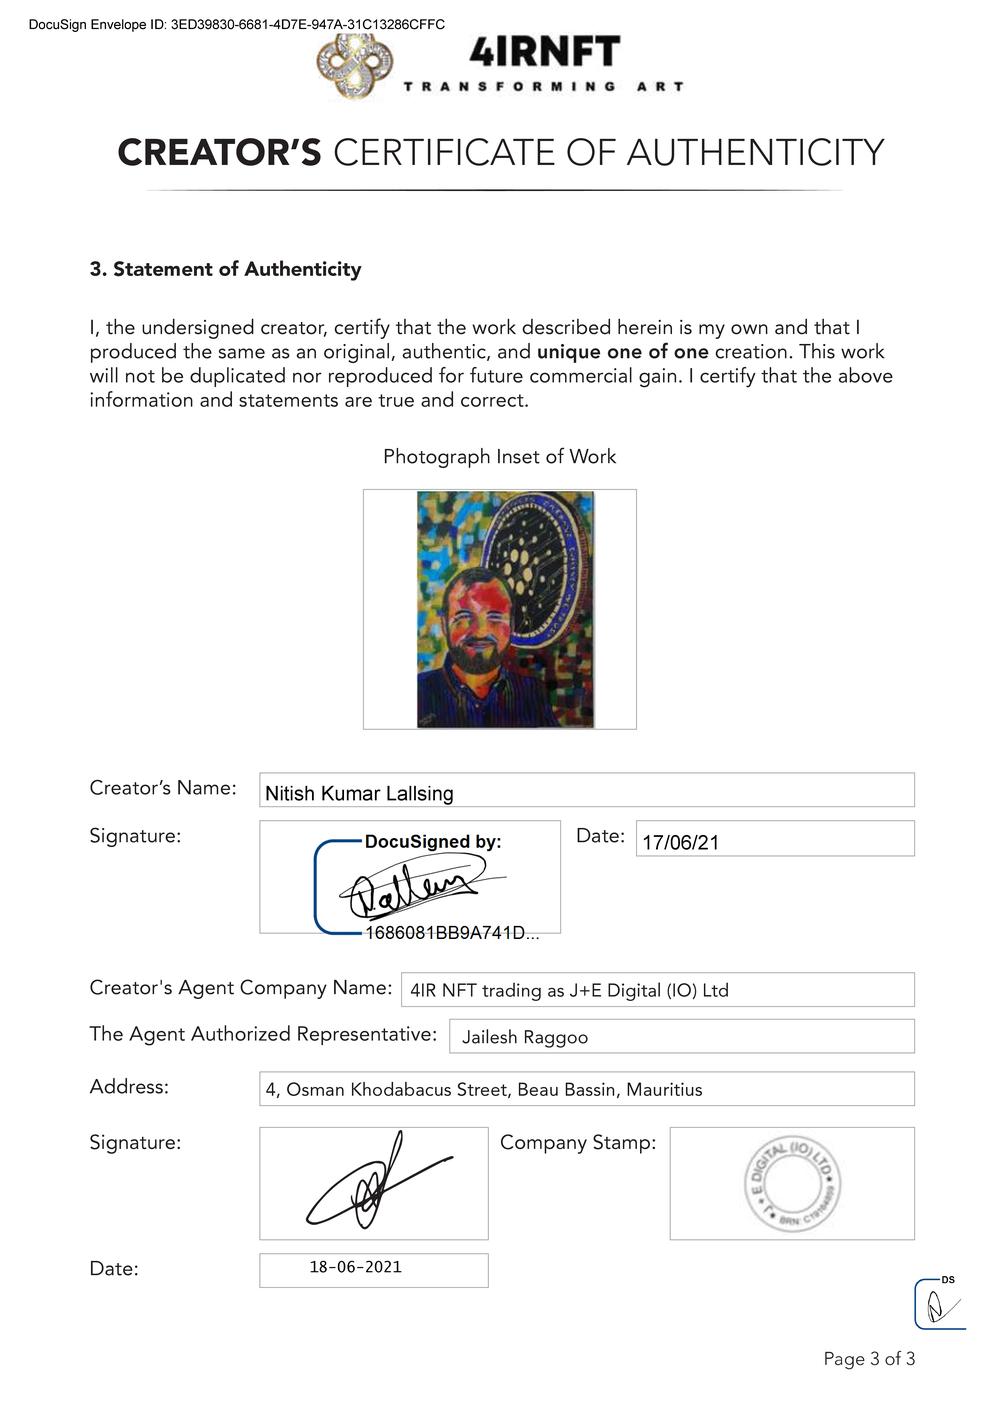 Certificate of Authenticity and Consignment_4IR_Hoskinson